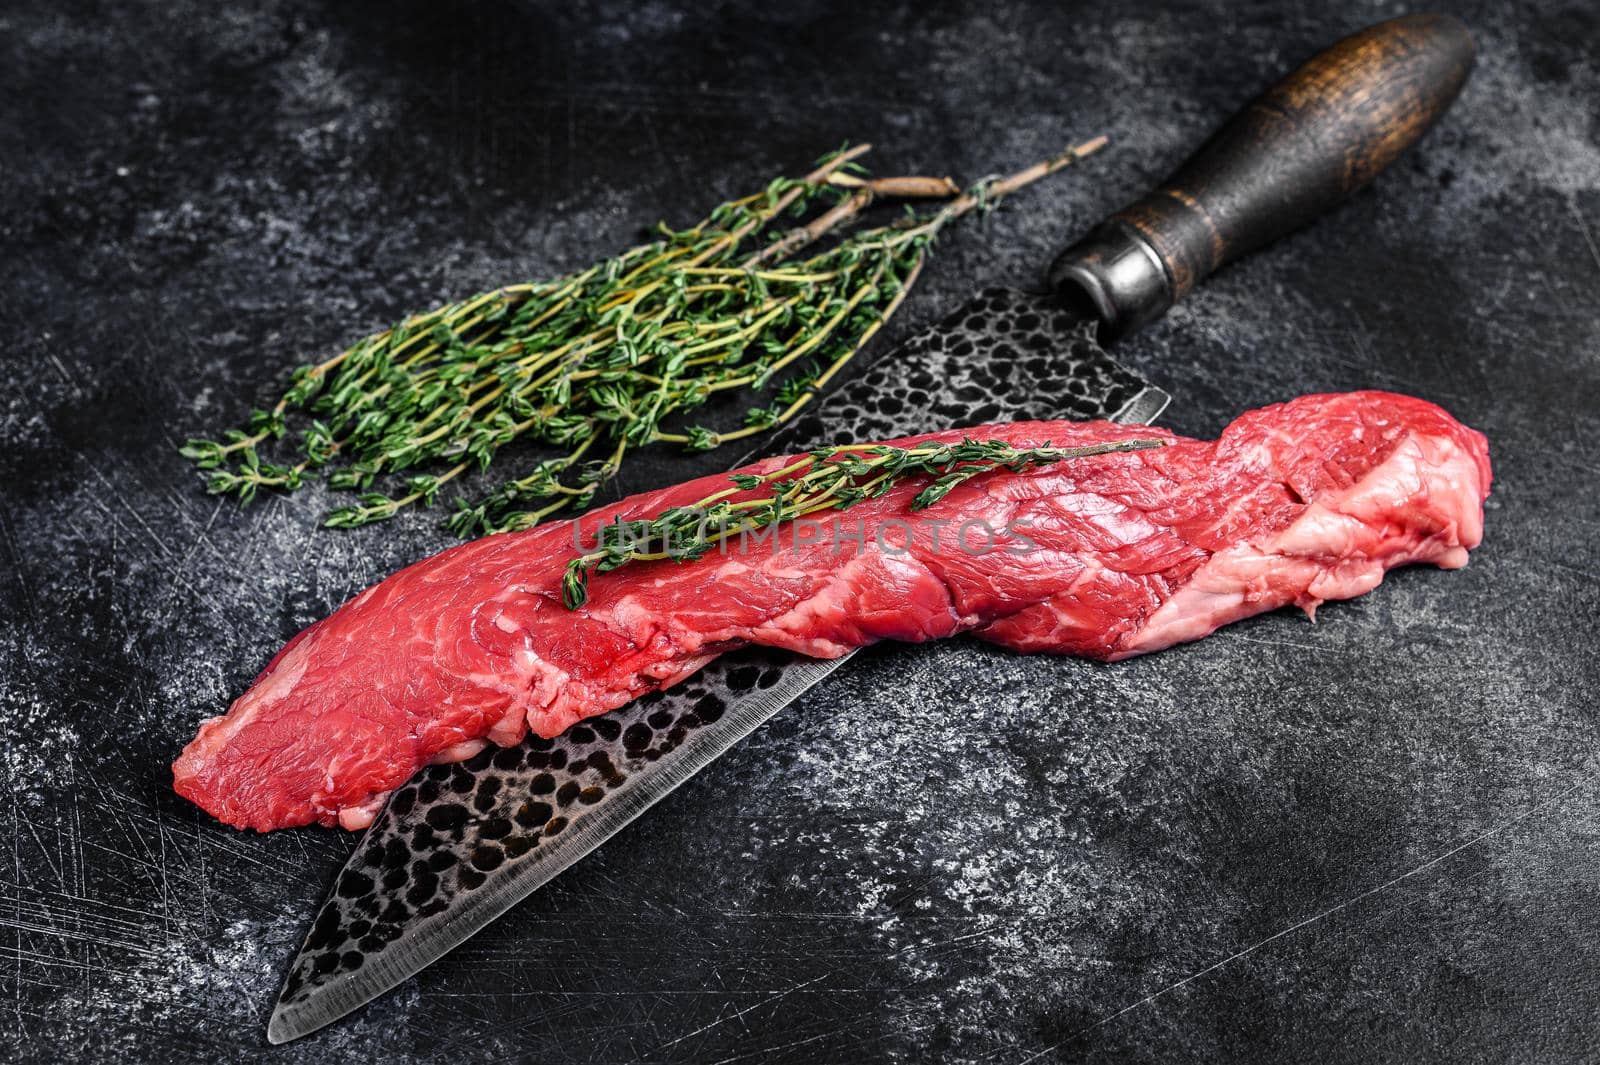 Raw skirt machete beef steak on a meat cleaver. Black background. Top view by Composter